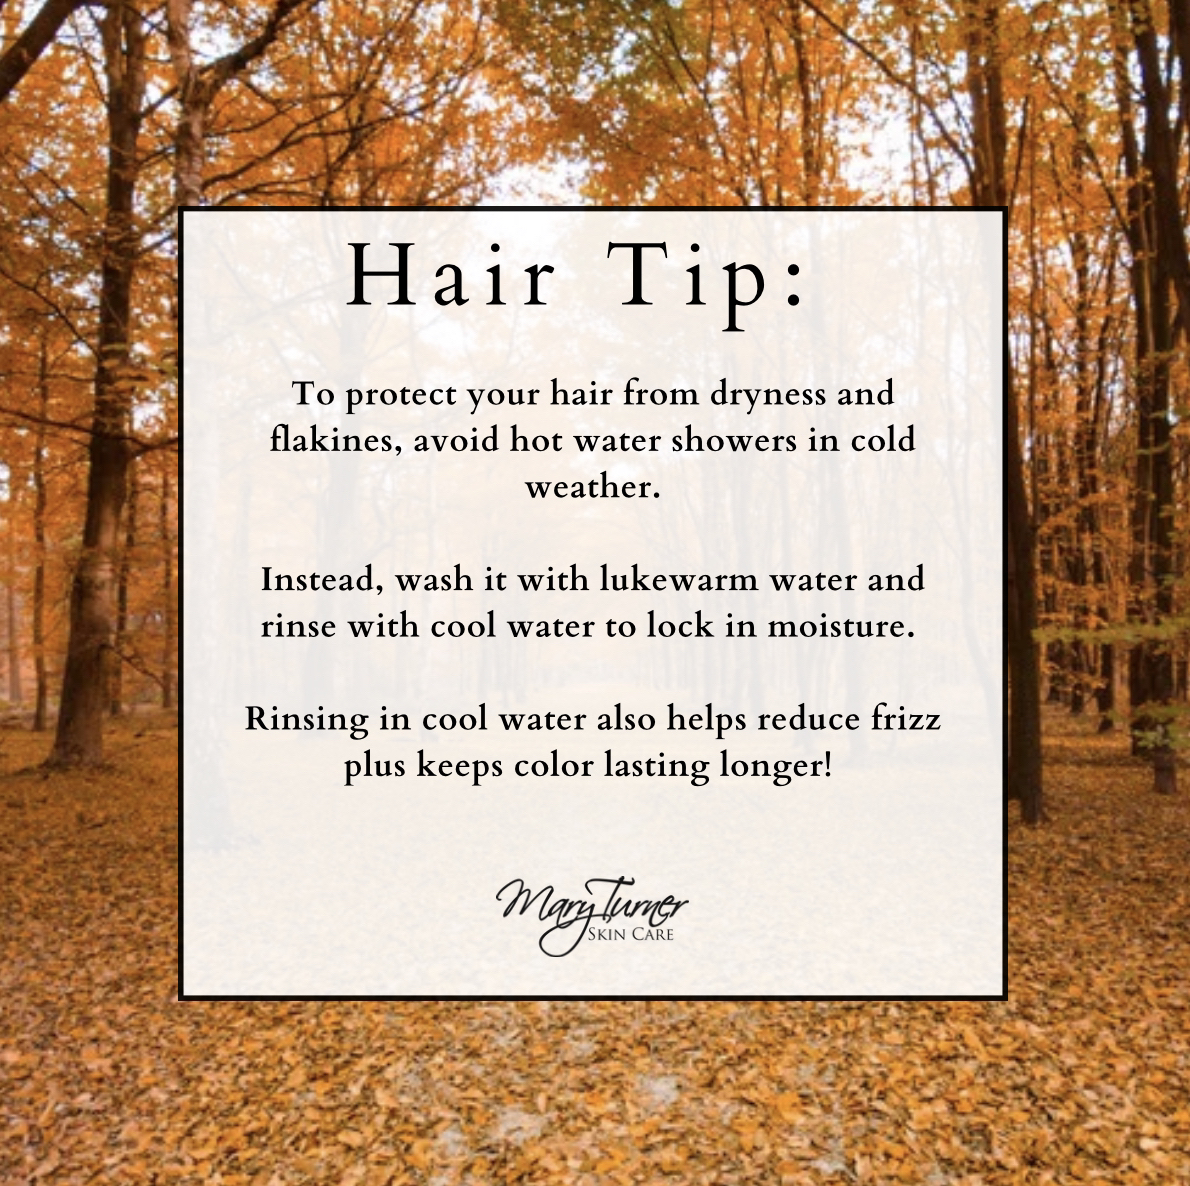 For more tips, come visit our very educated stylists! Schedule online or call 724-657-5156.
 #hair #healthyhair #styles #hairstyles #longhair #curls #takecareofthehair #products #weareheretohelp #cosmo #happy #maryturnerdayspa